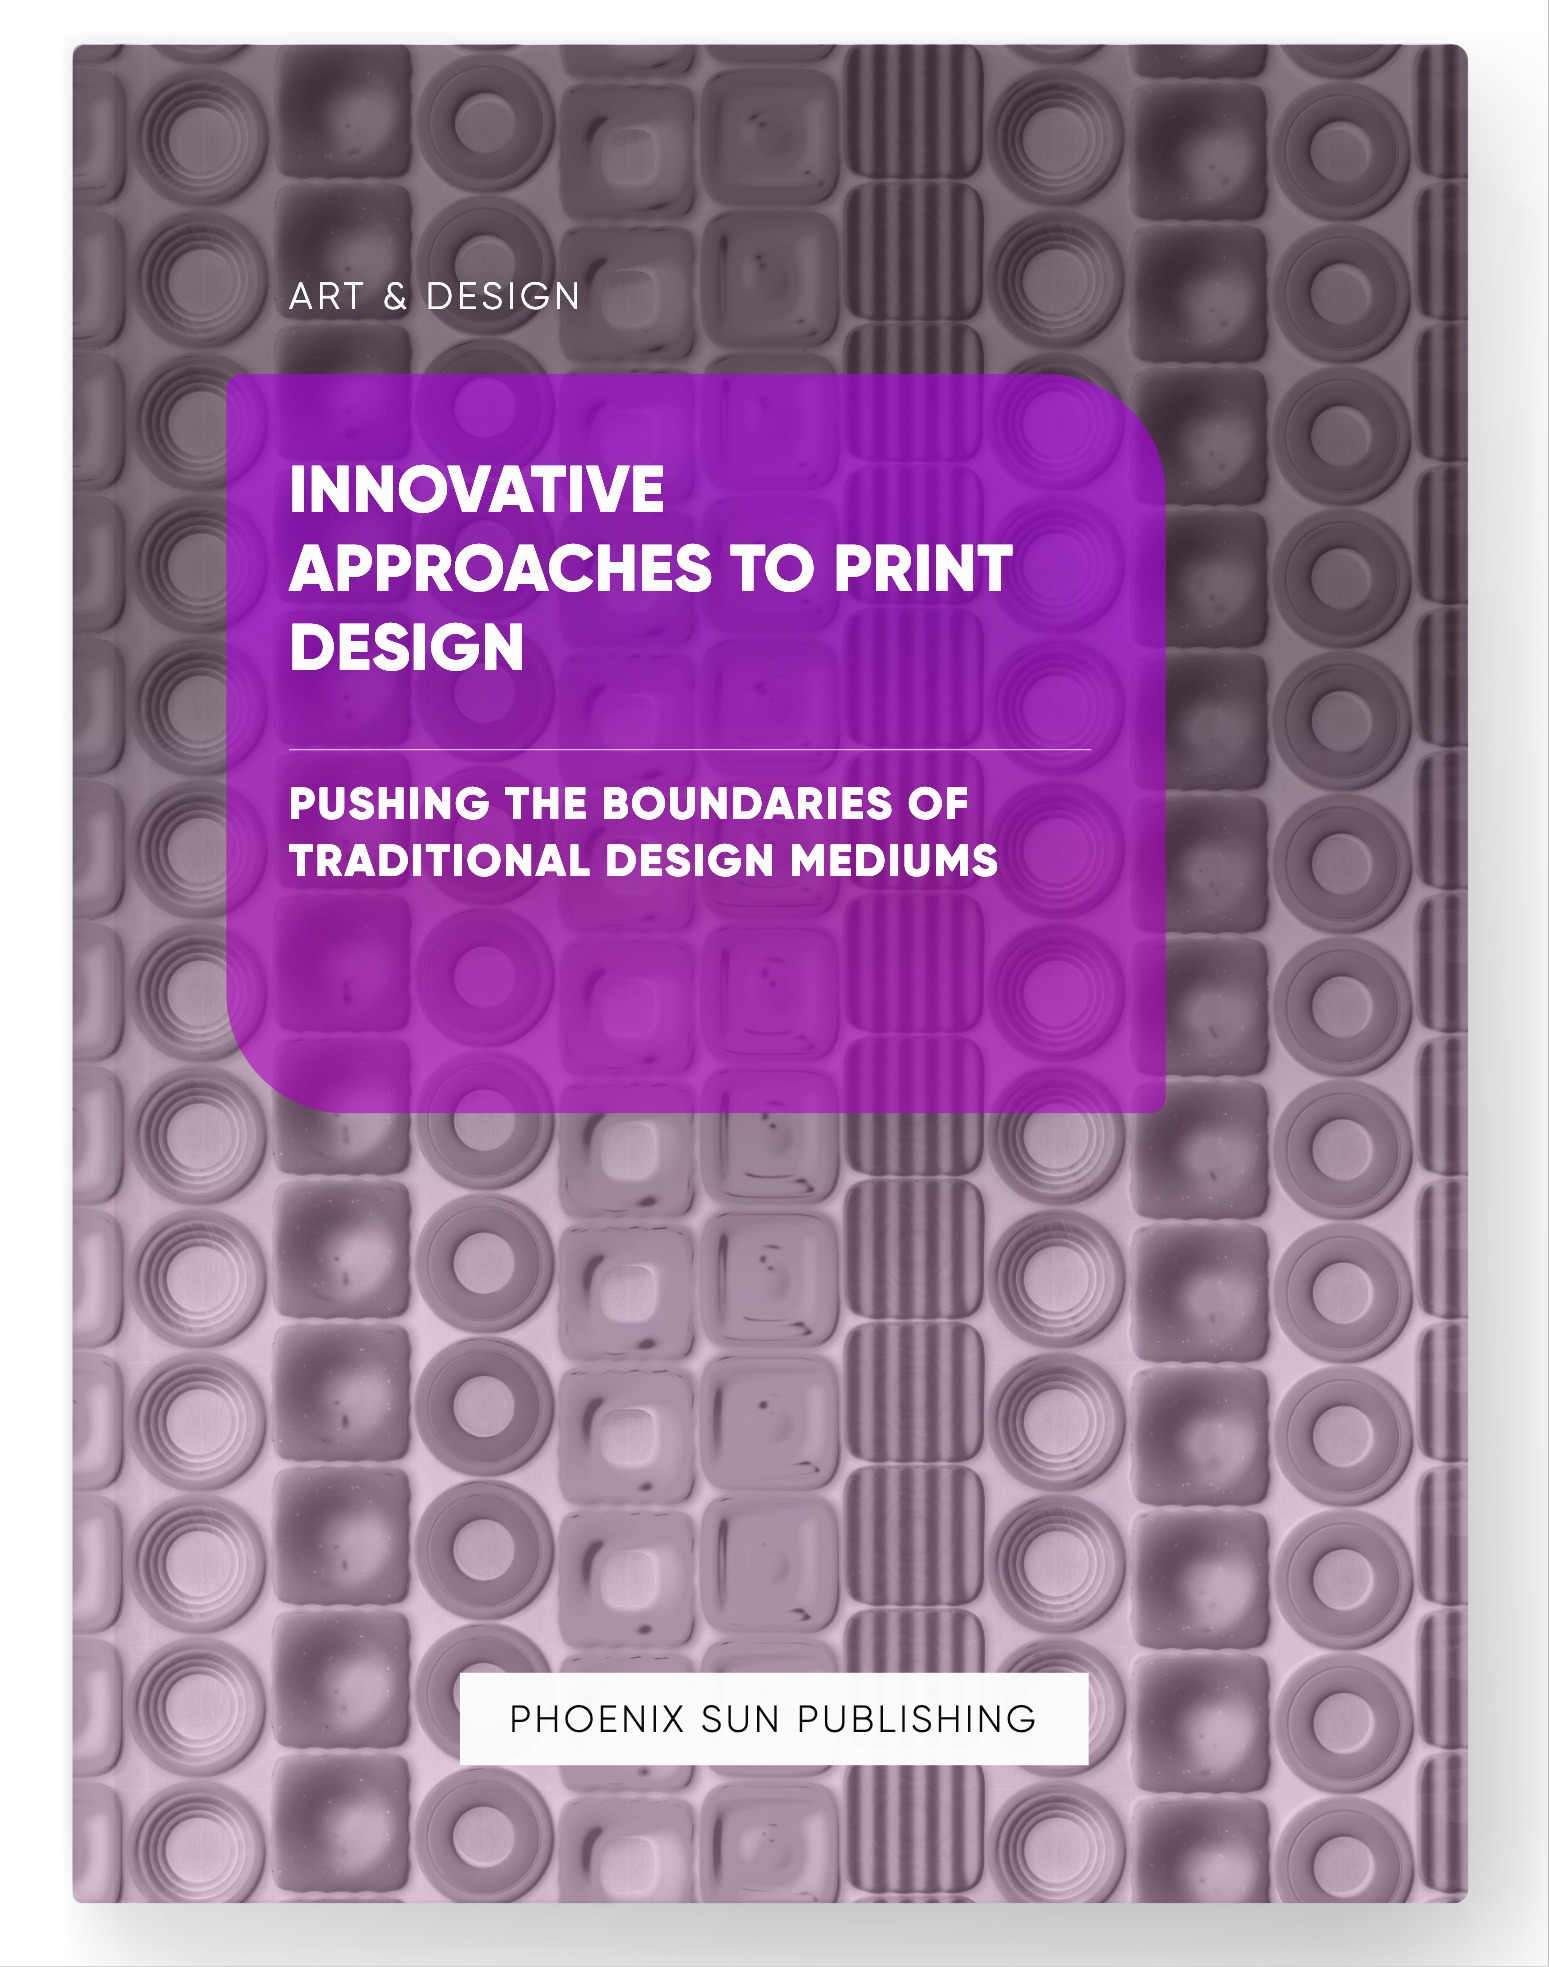 Innovative Approaches to Print Design – Pushing the Boundaries of Traditional Design Mediums